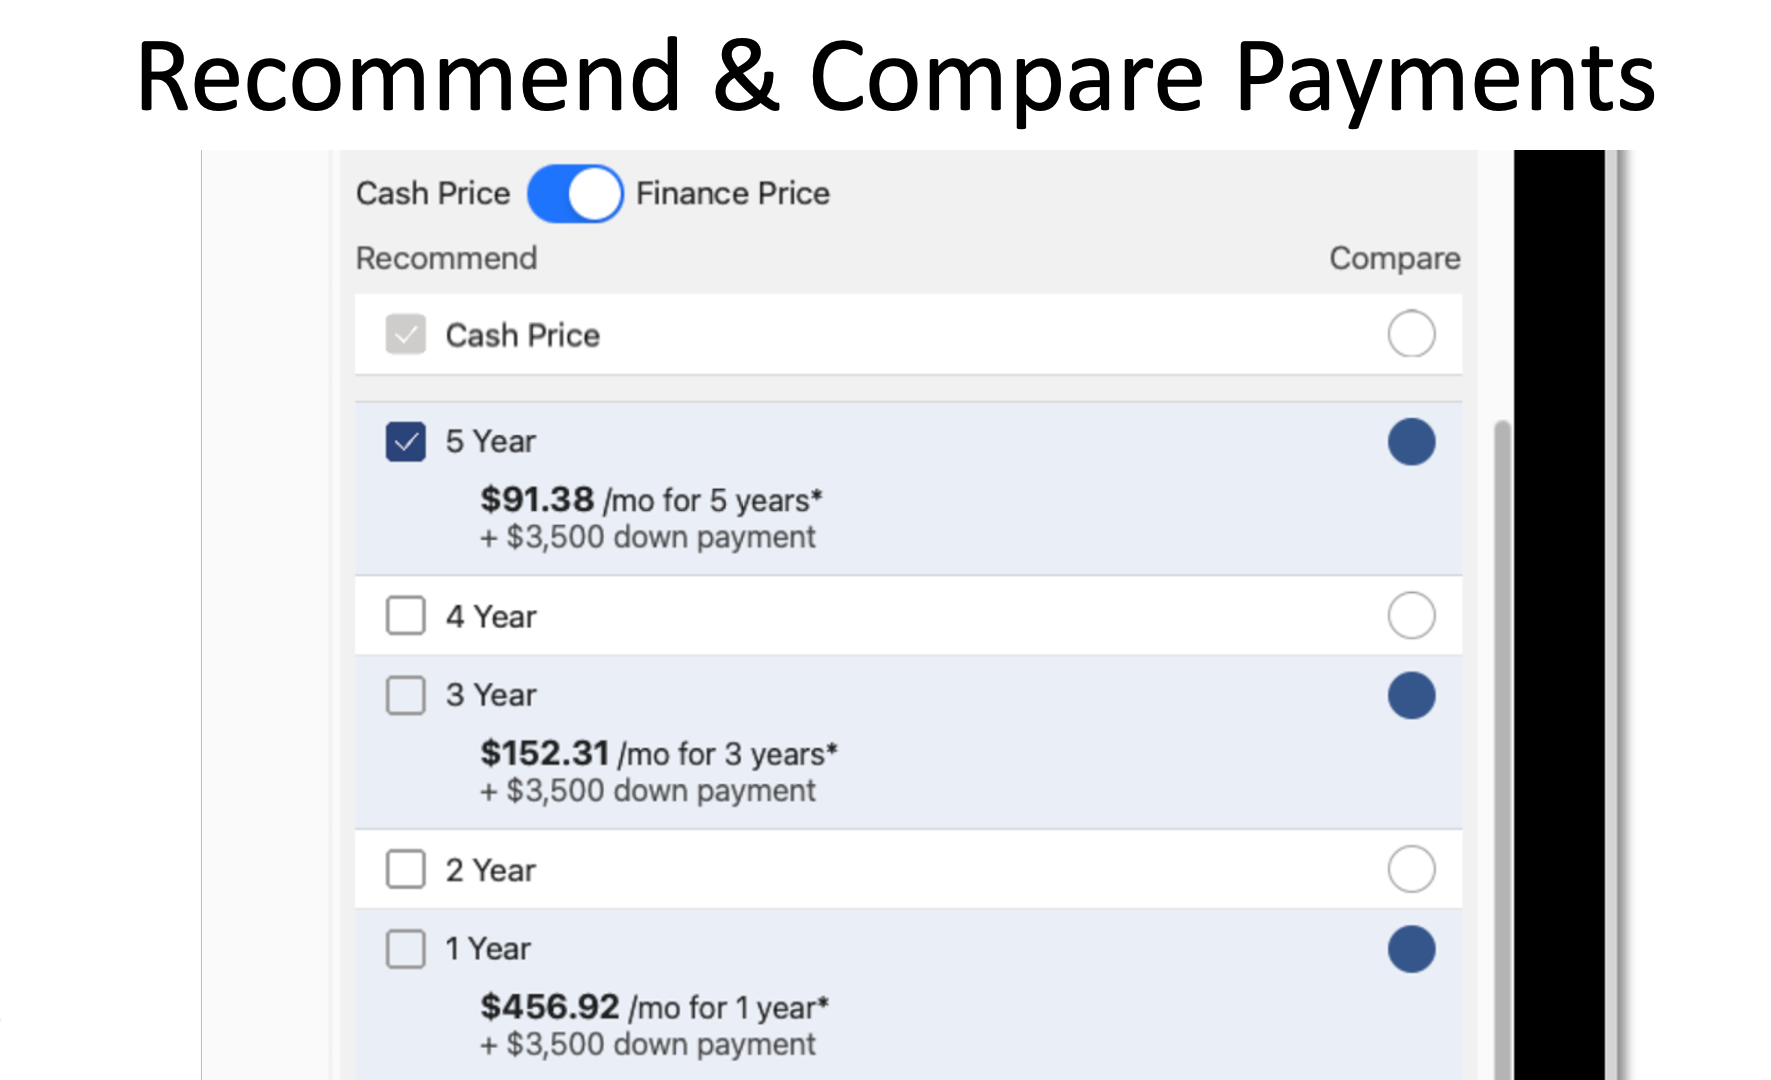 Recommend and Compare Payments